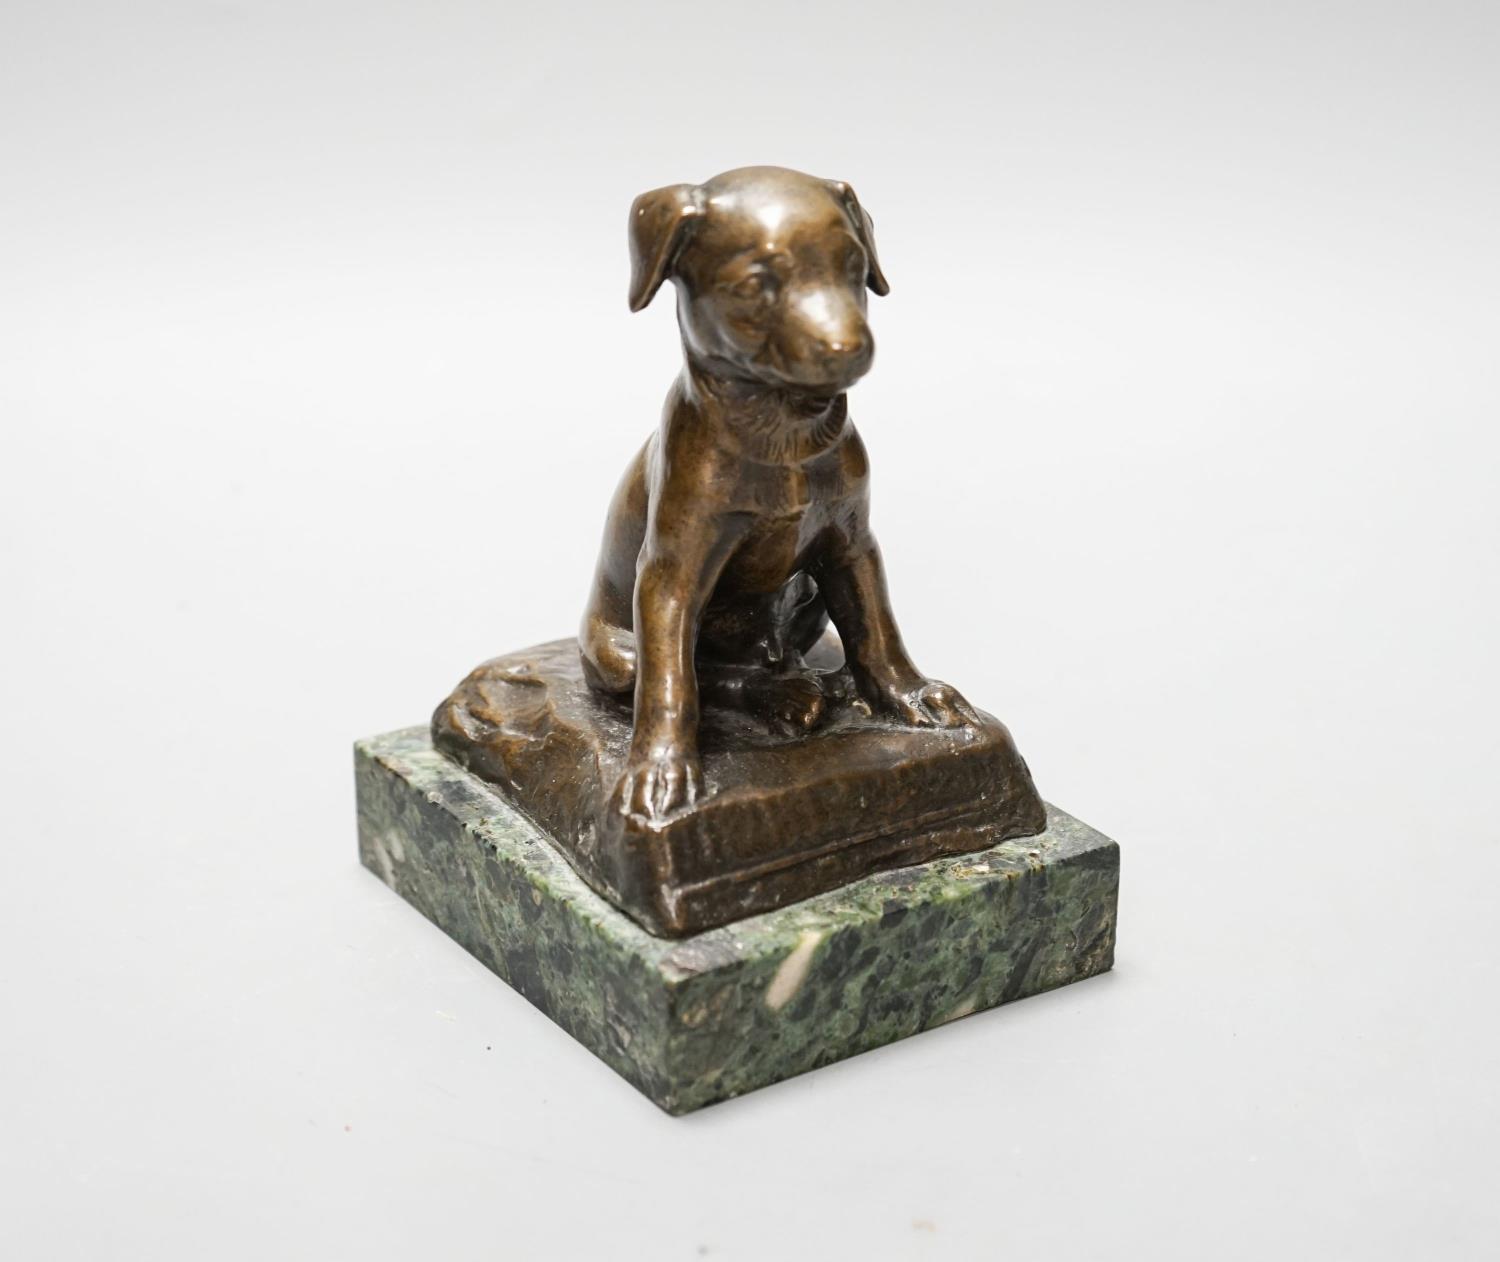 An early 20th century bronze figure of a seated puppy, 13cm